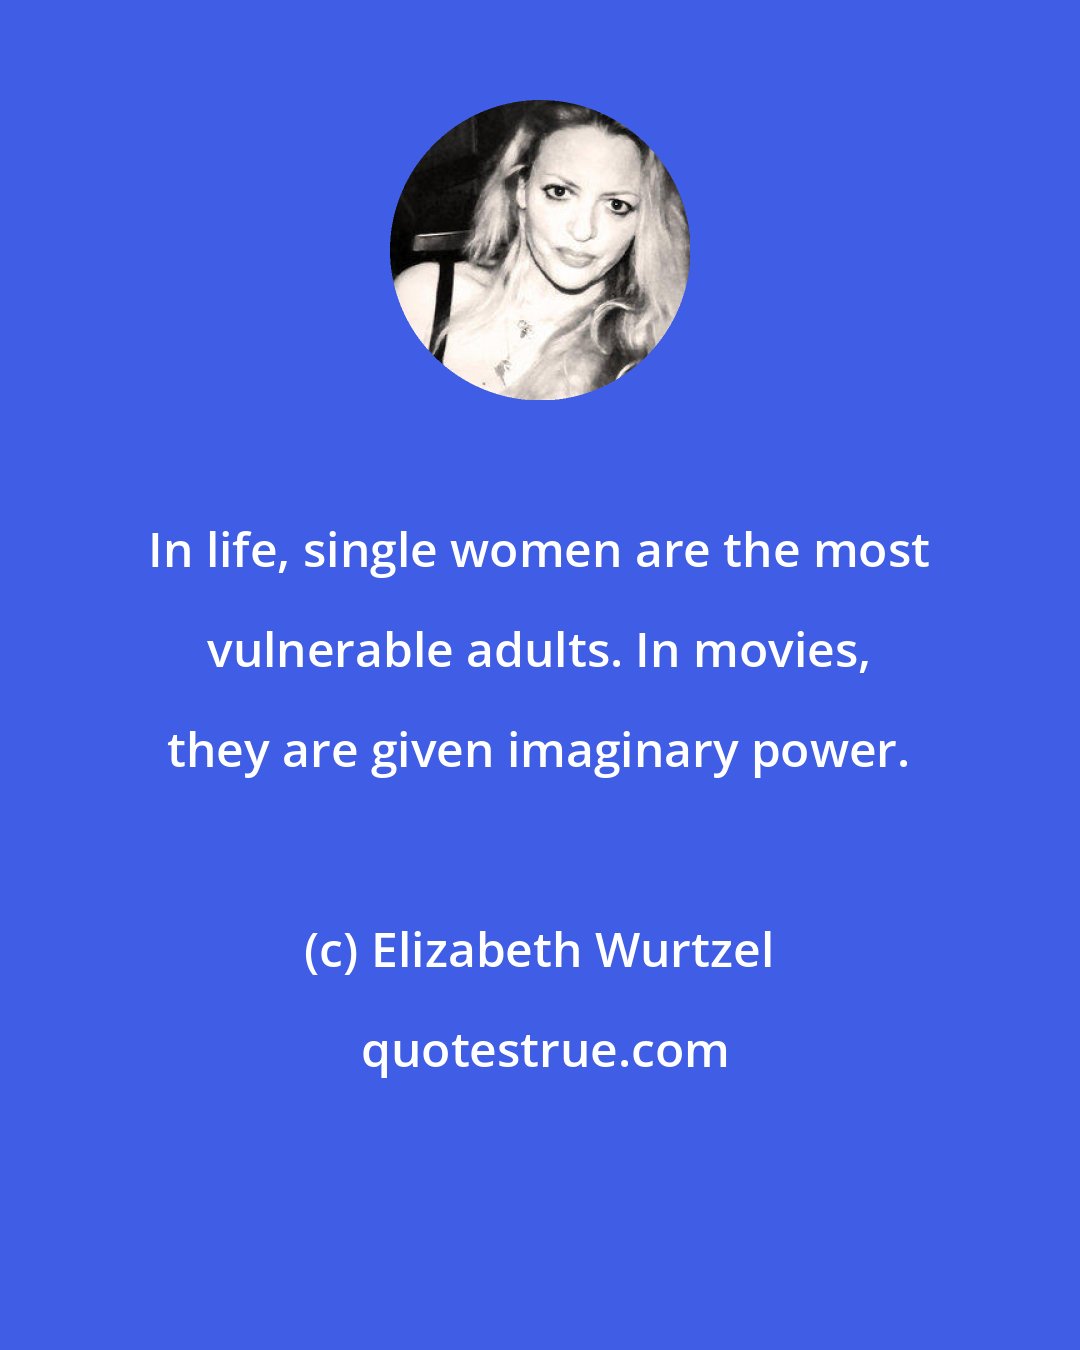 Elizabeth Wurtzel: In life, single women are the most vulnerable adults. In movies, they are given imaginary power.